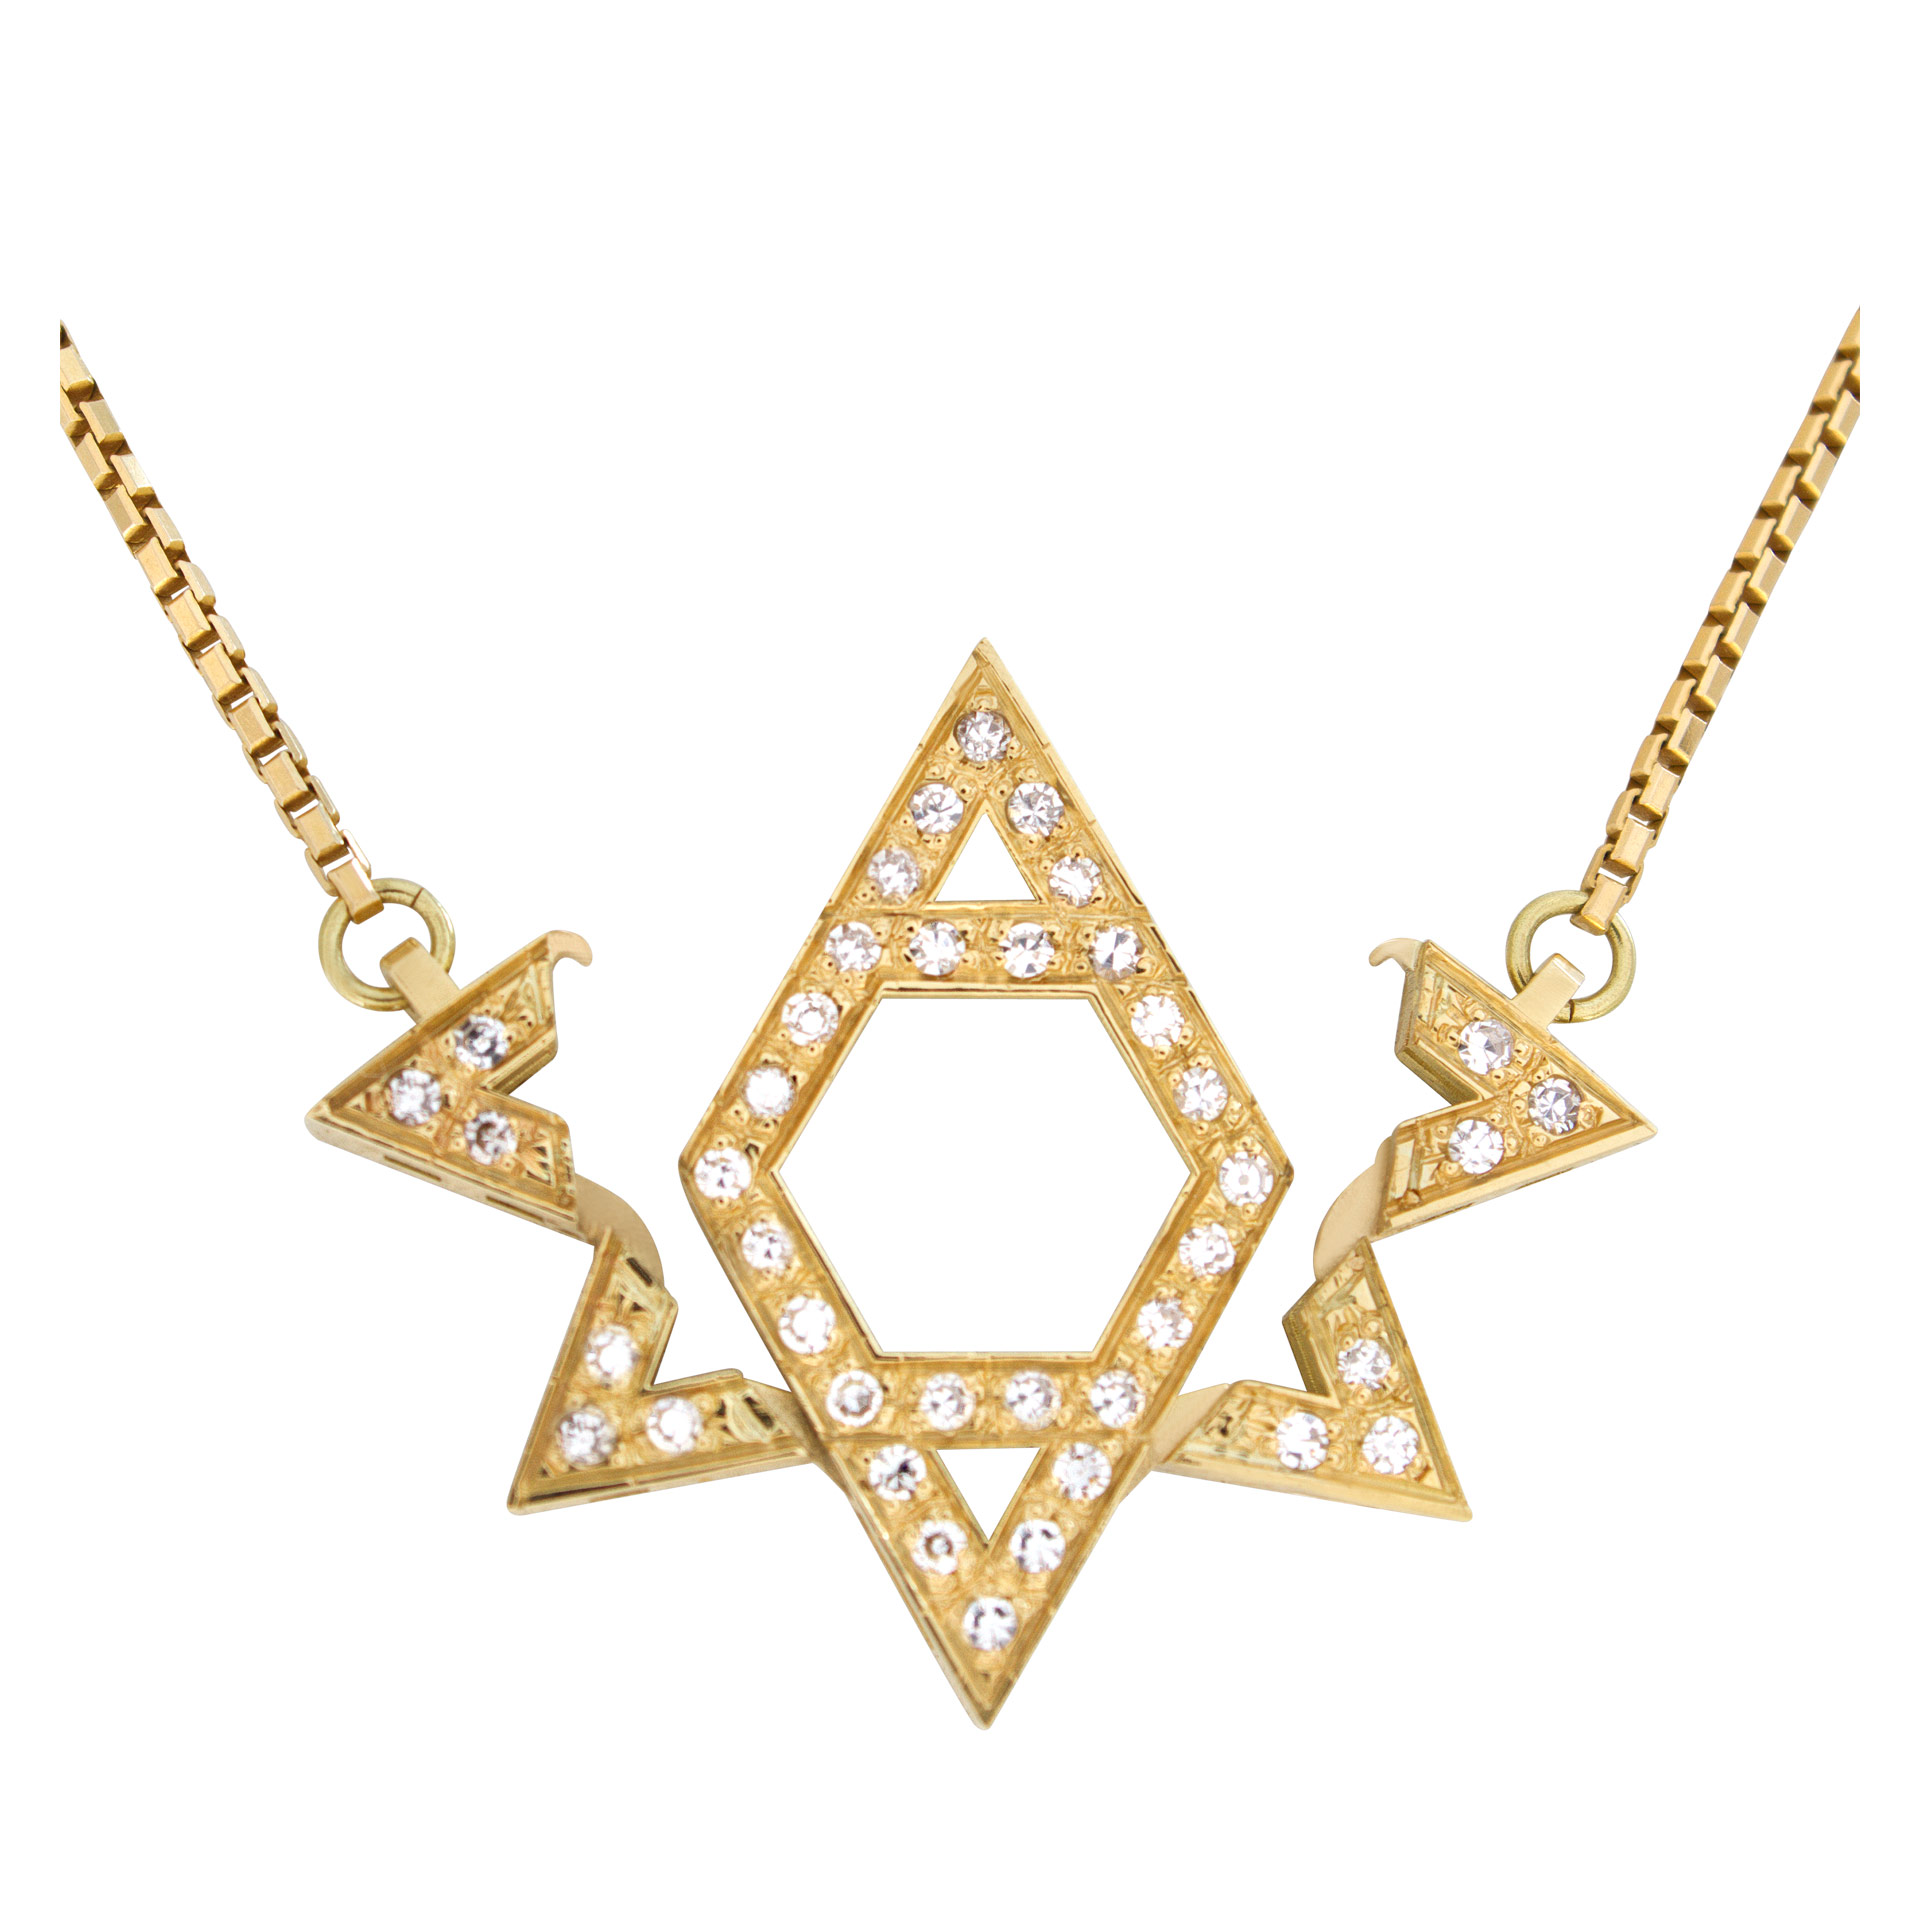 "Star of David" pendant with approximately 0.75 carat pave diamonds set in 18k yellow gold image 4